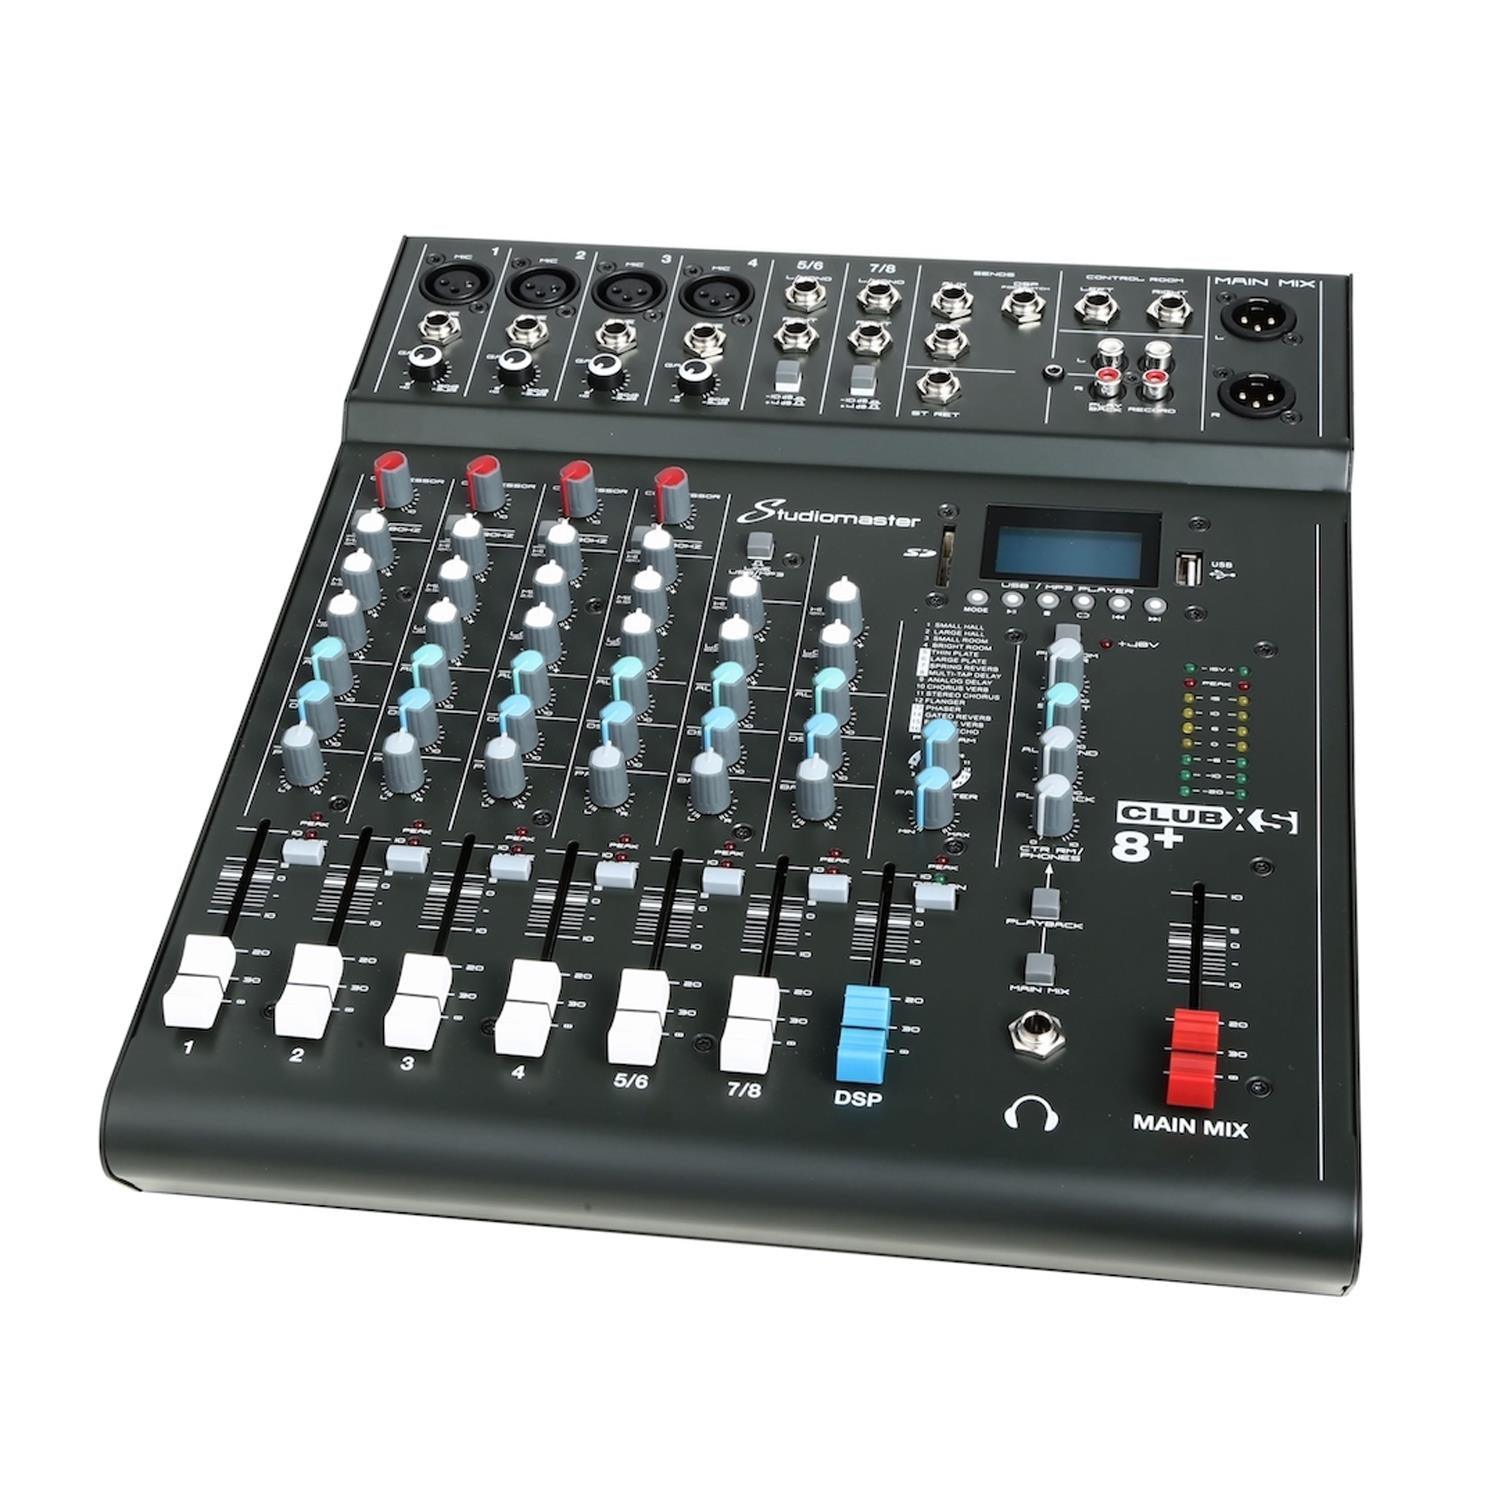 Studiomaster CLub XS 8+ 6 Channel Mixing Desk - DY Pro Audio